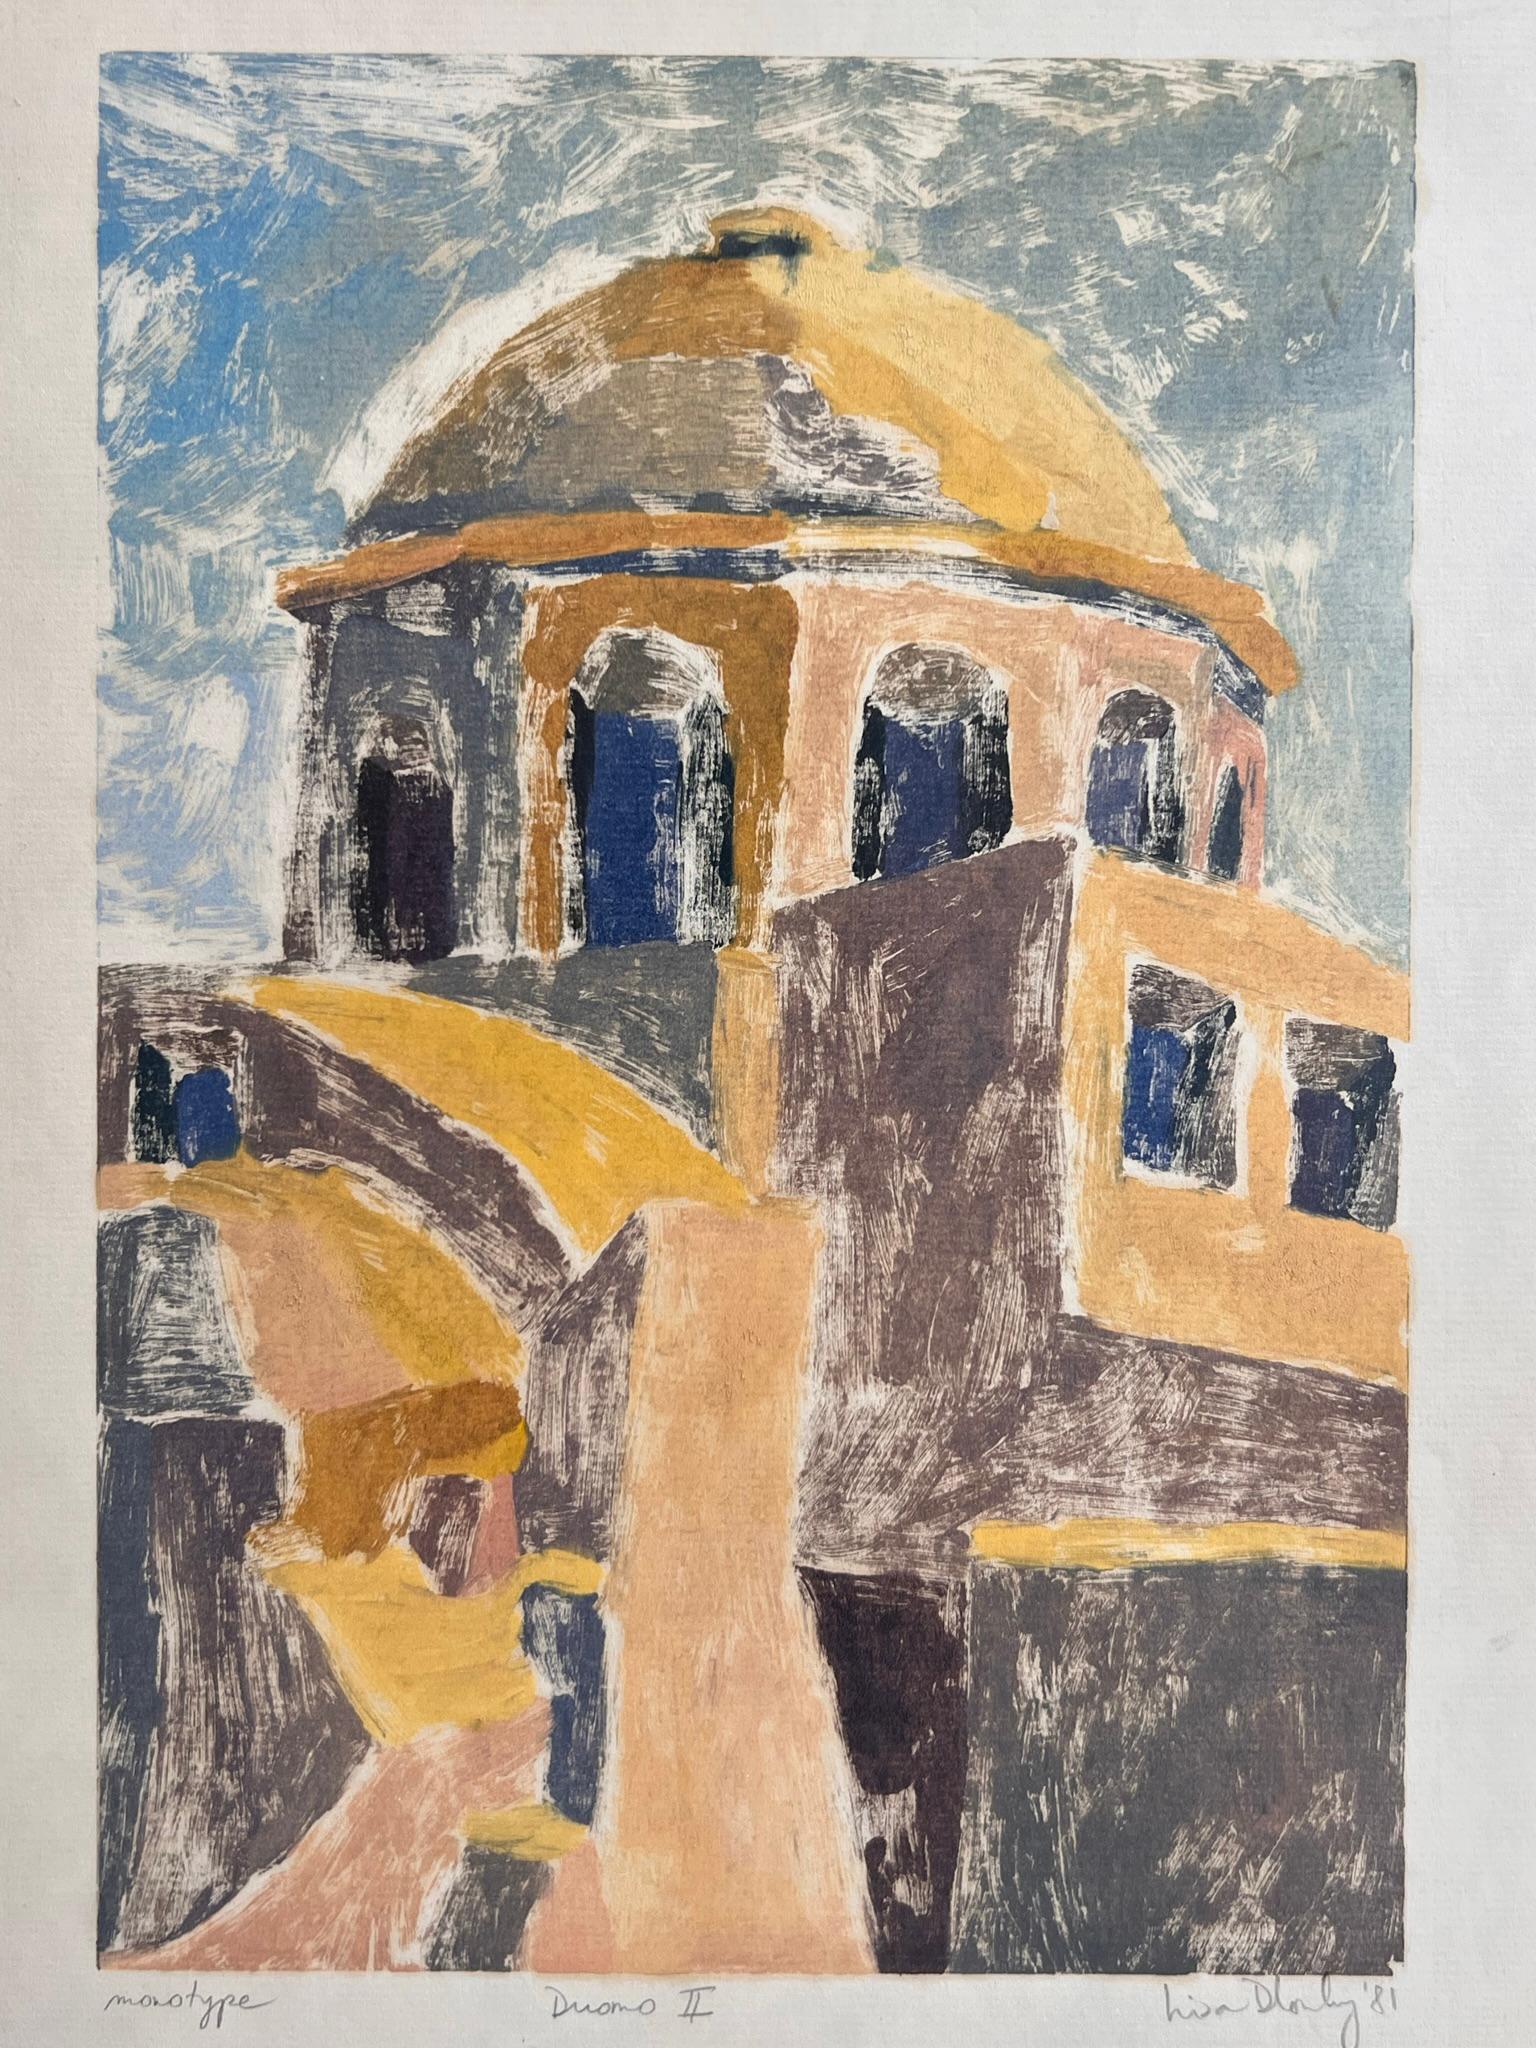 Pair of Original Monotype Etchings of the Duomo, Signed by Artist, 1981 For Sale 9